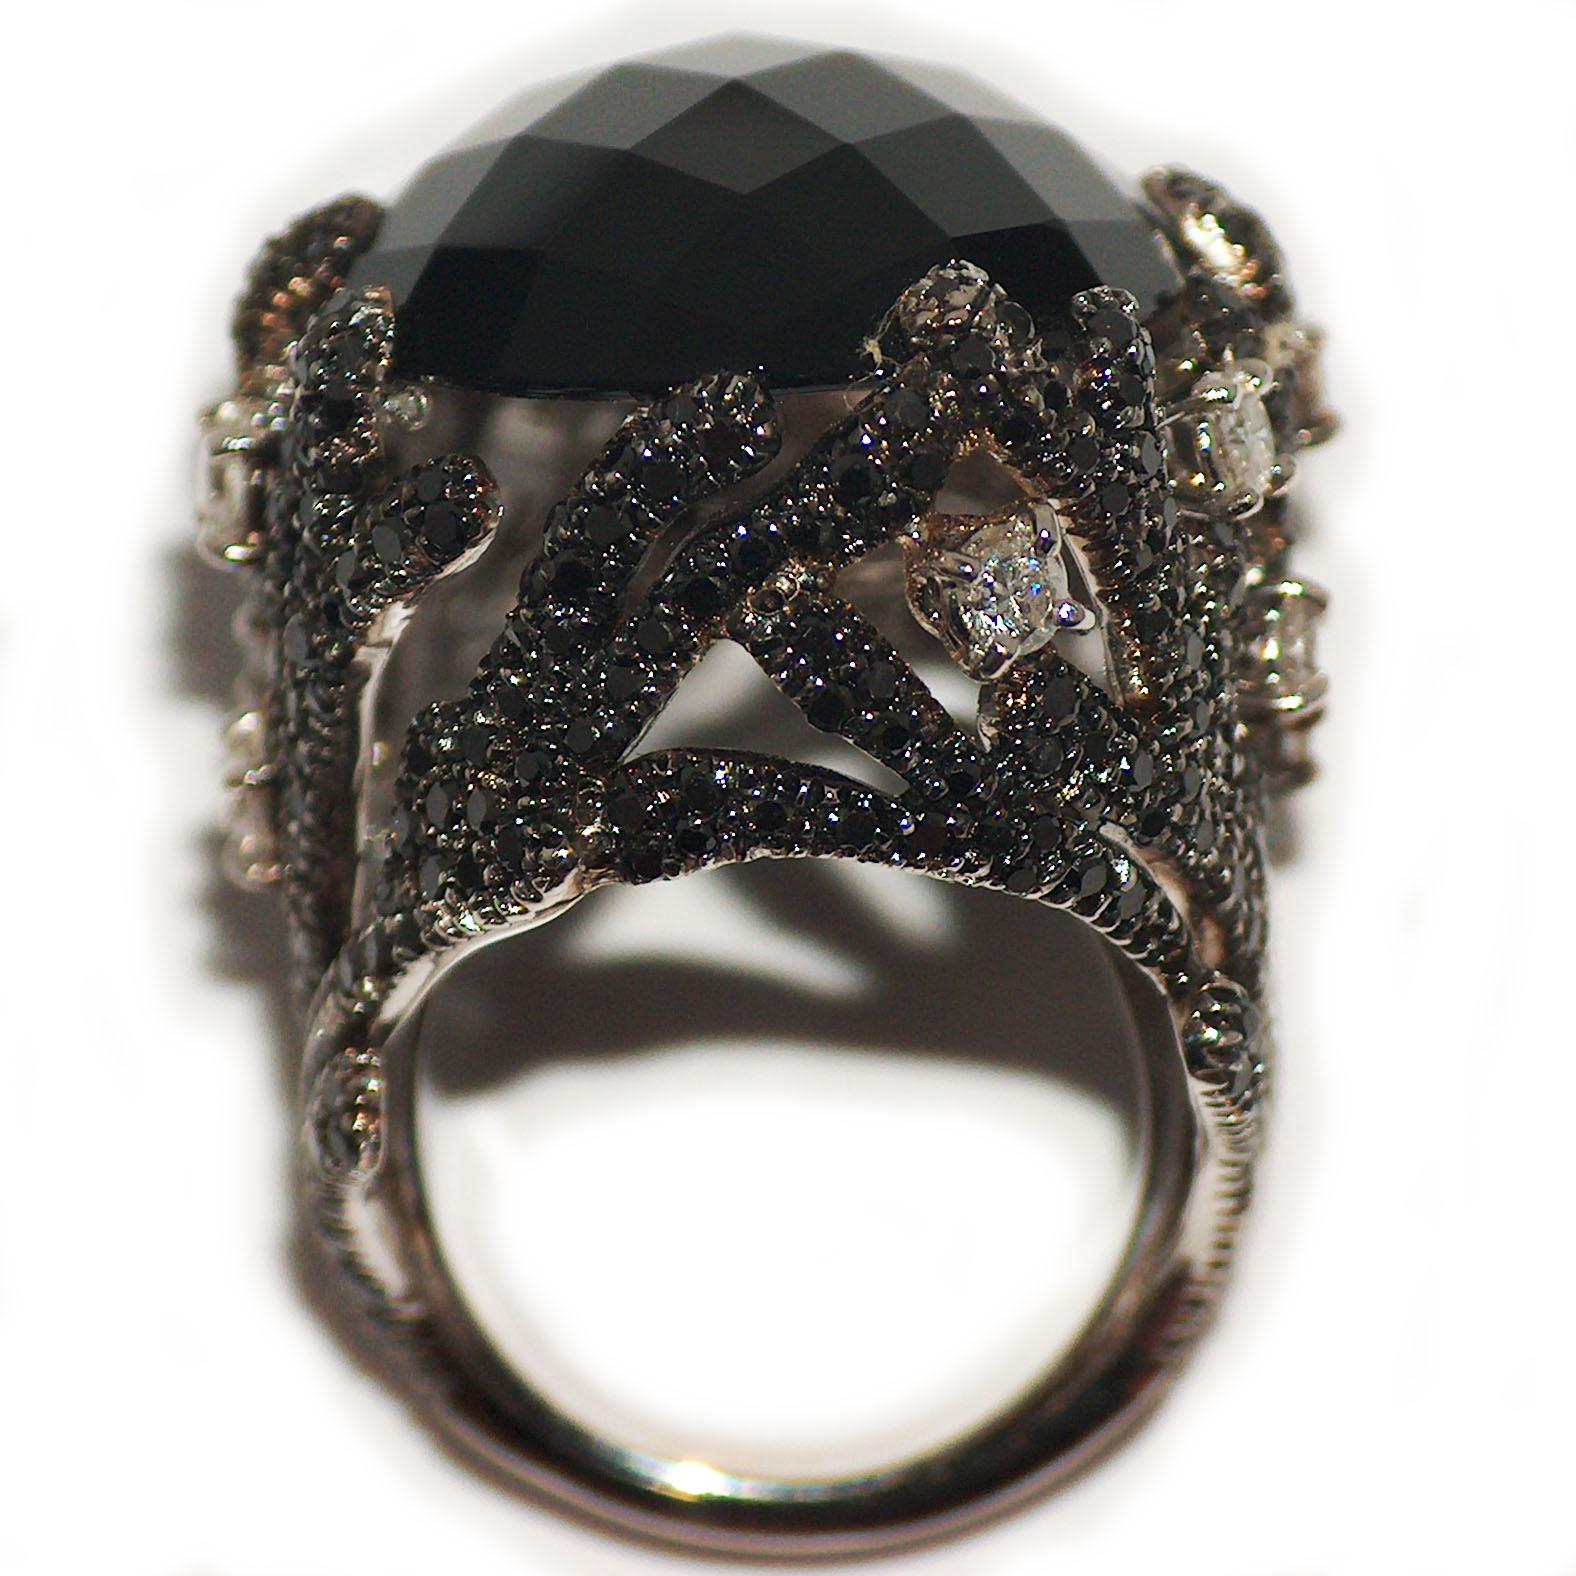 Paolo Piovan White and Black Diamonds, Onyx Ring in white gold black rhodium For Sale 1